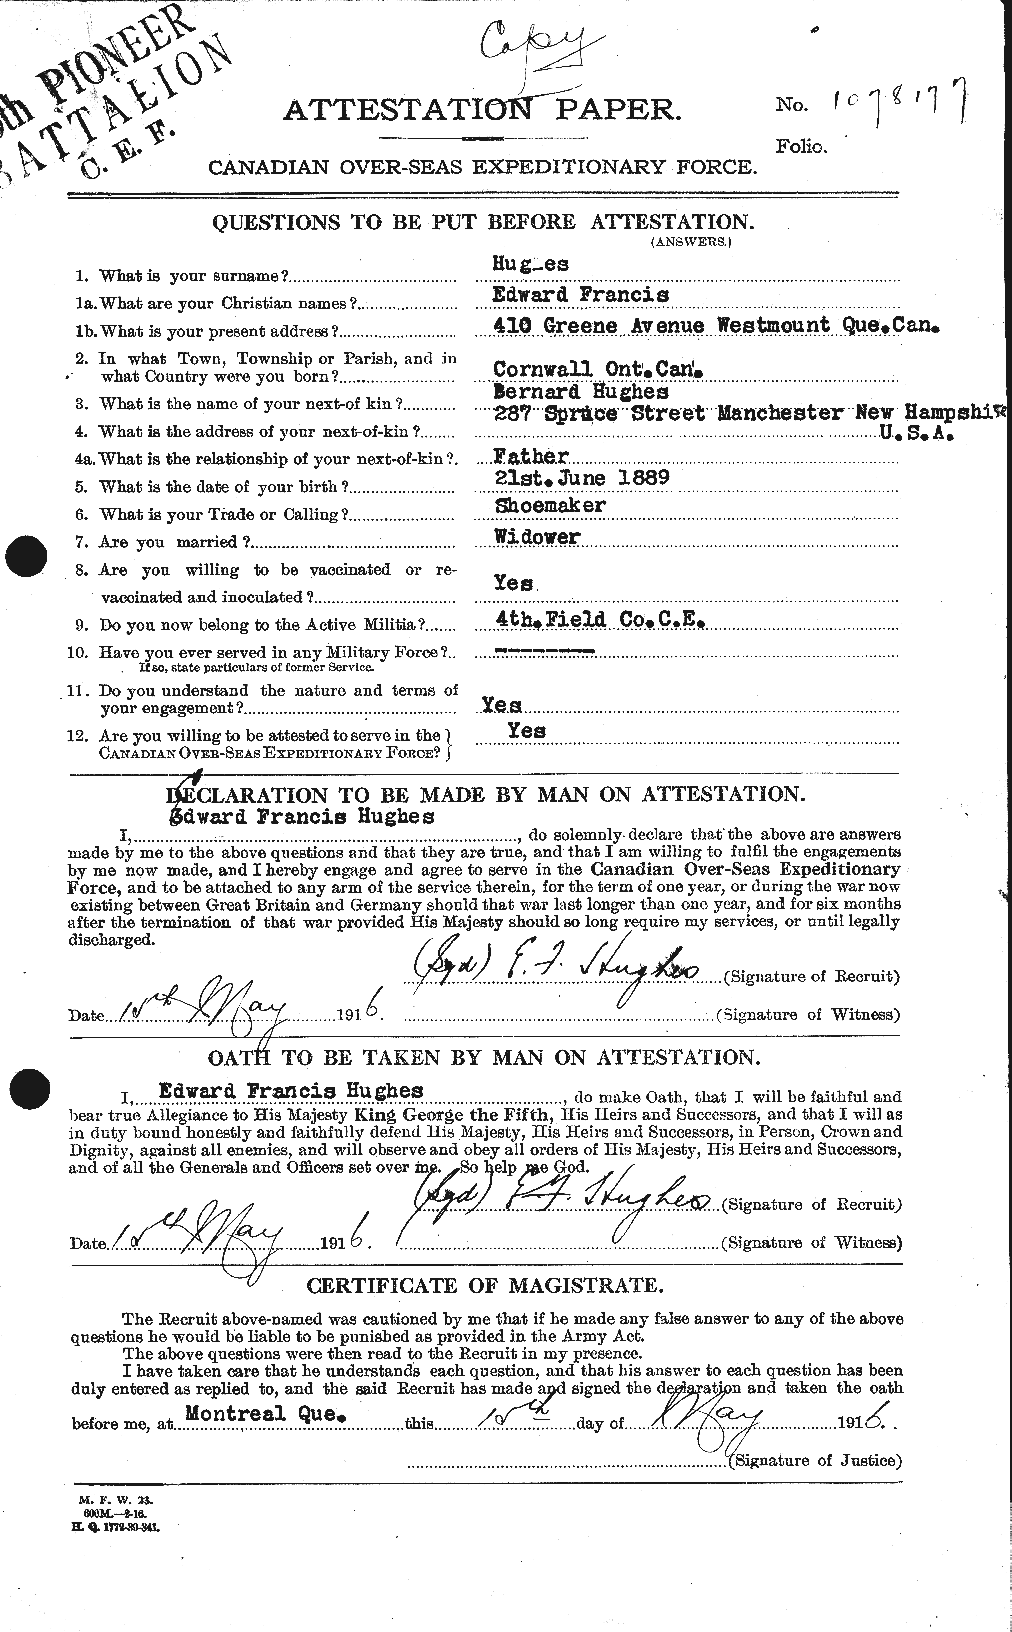 Personnel Records of the First World War - CEF 402685a